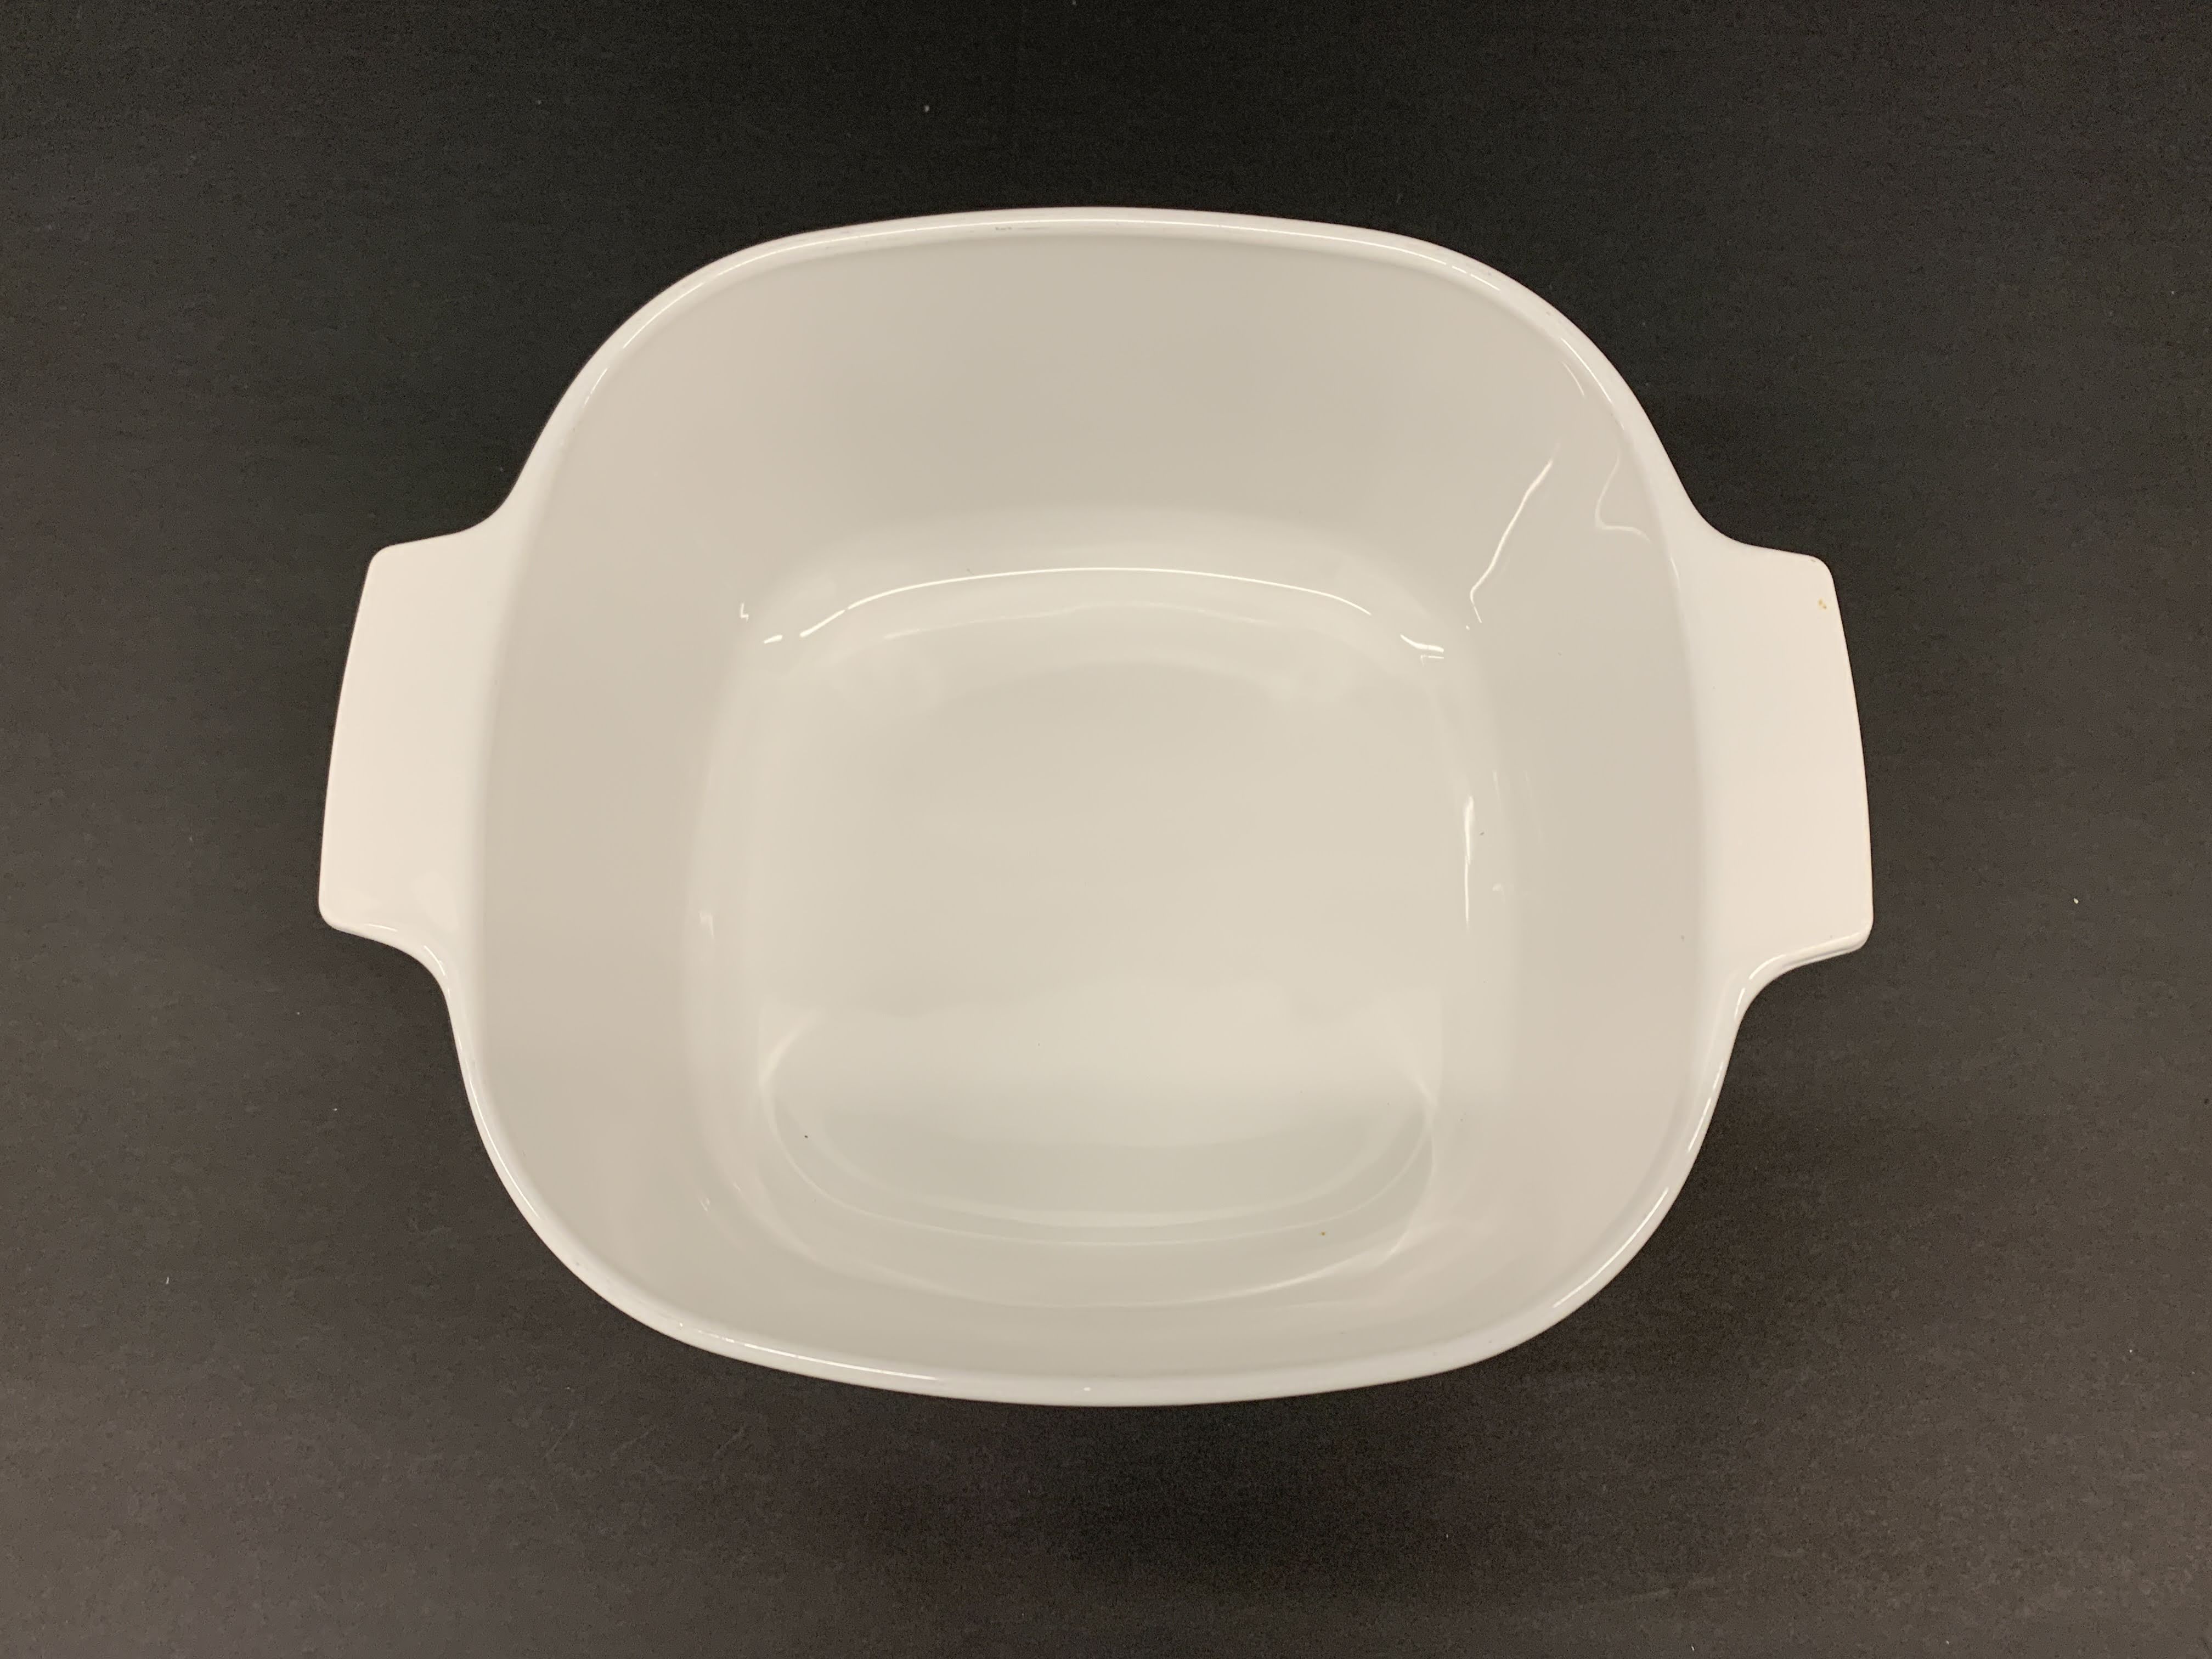 Spice Of Life 1 - Corning Ware Casserole - Square Shape With Lid